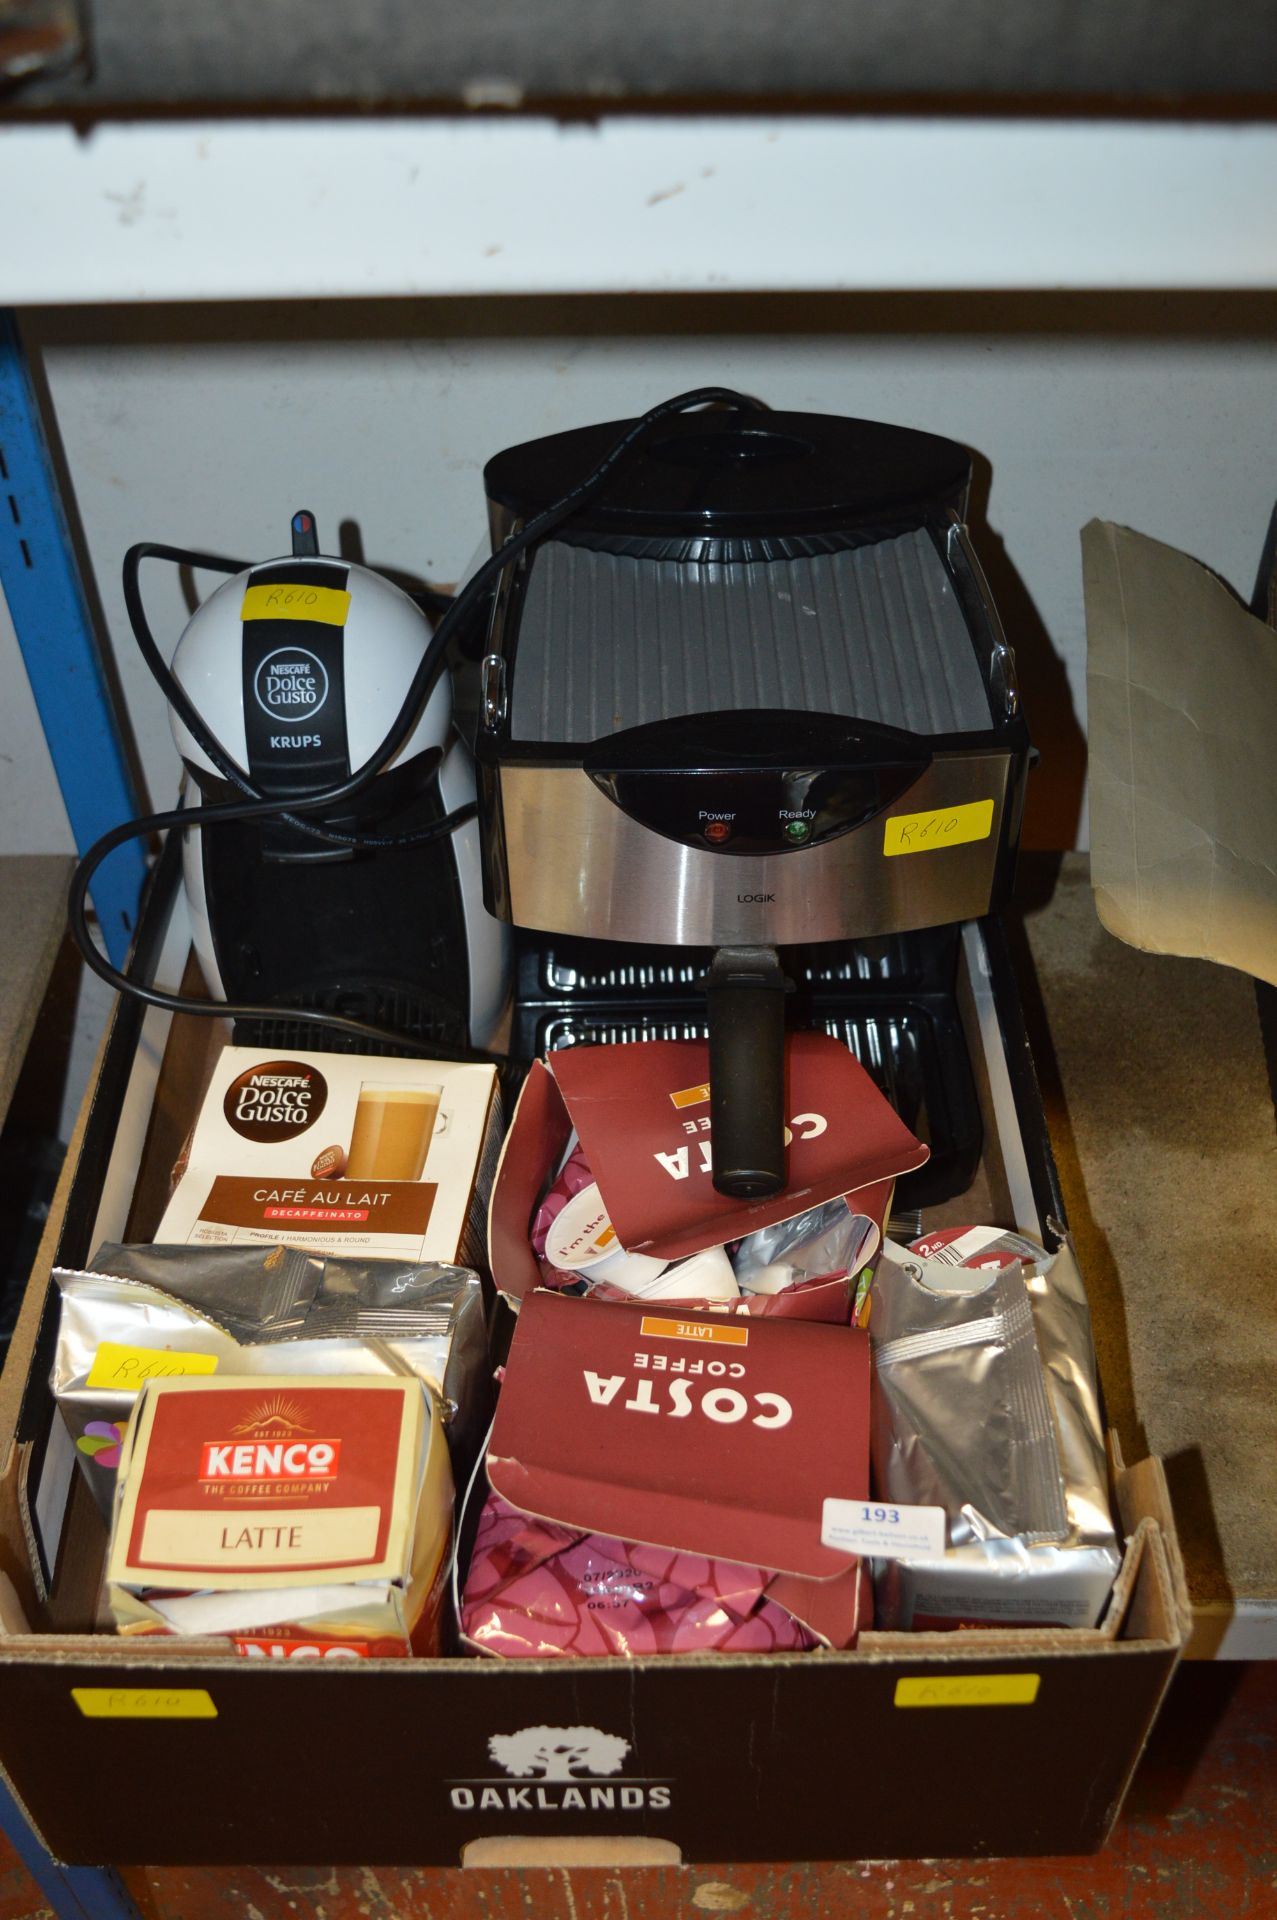 Logik Coffee Maker and a Dolce Gusto Coffee Maker